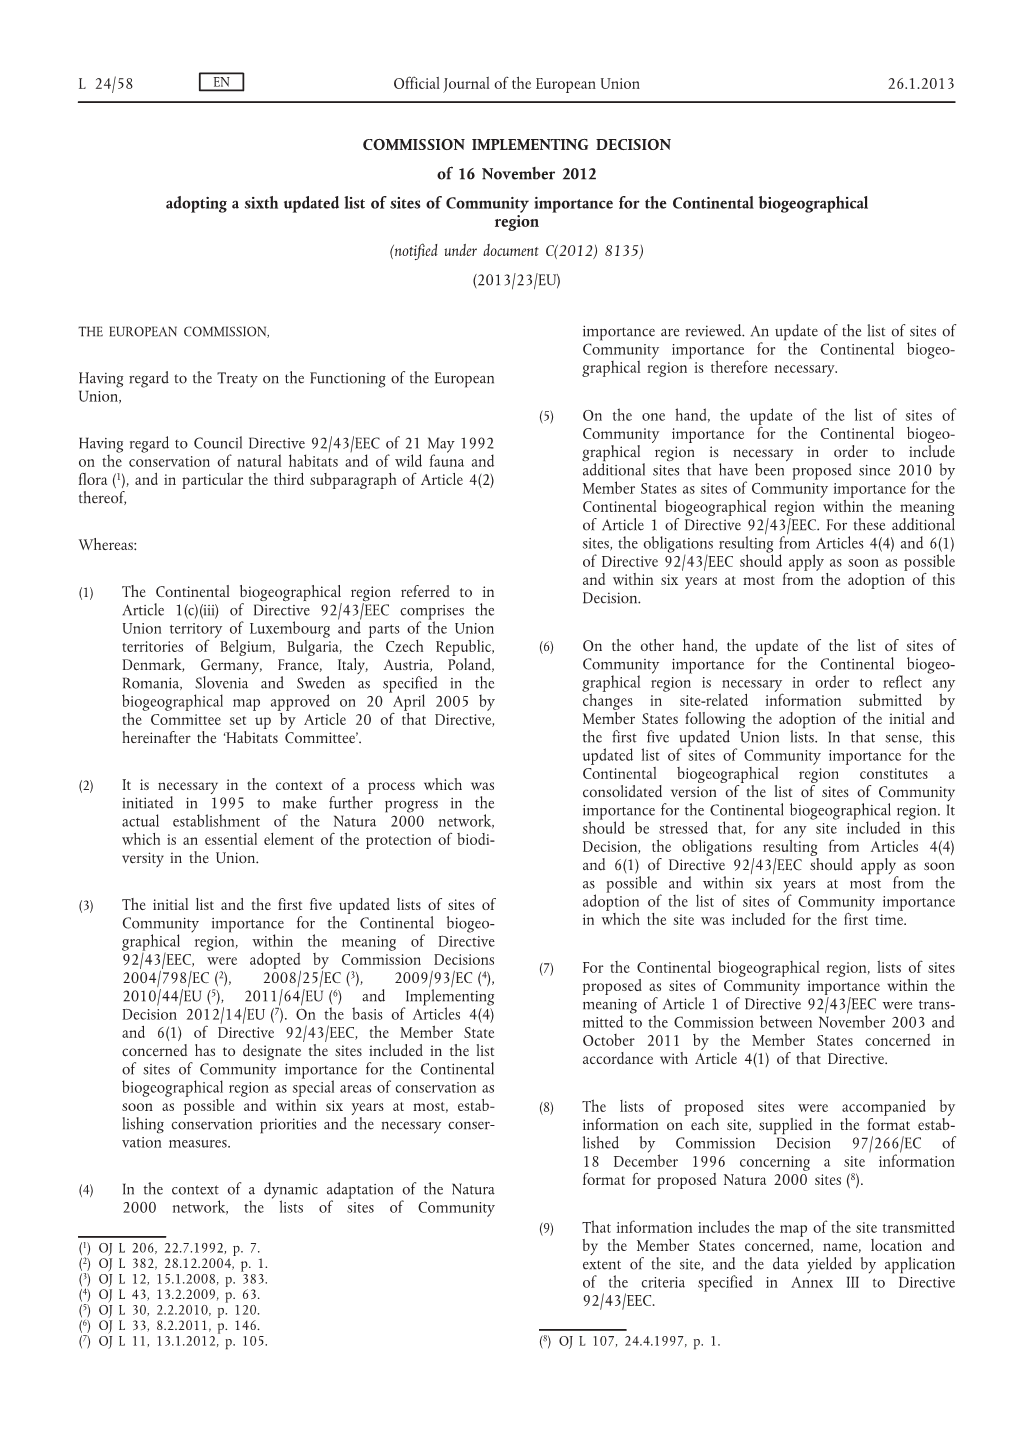 COMMISSION IMPLEMENTING DECISION of 16 November 2012